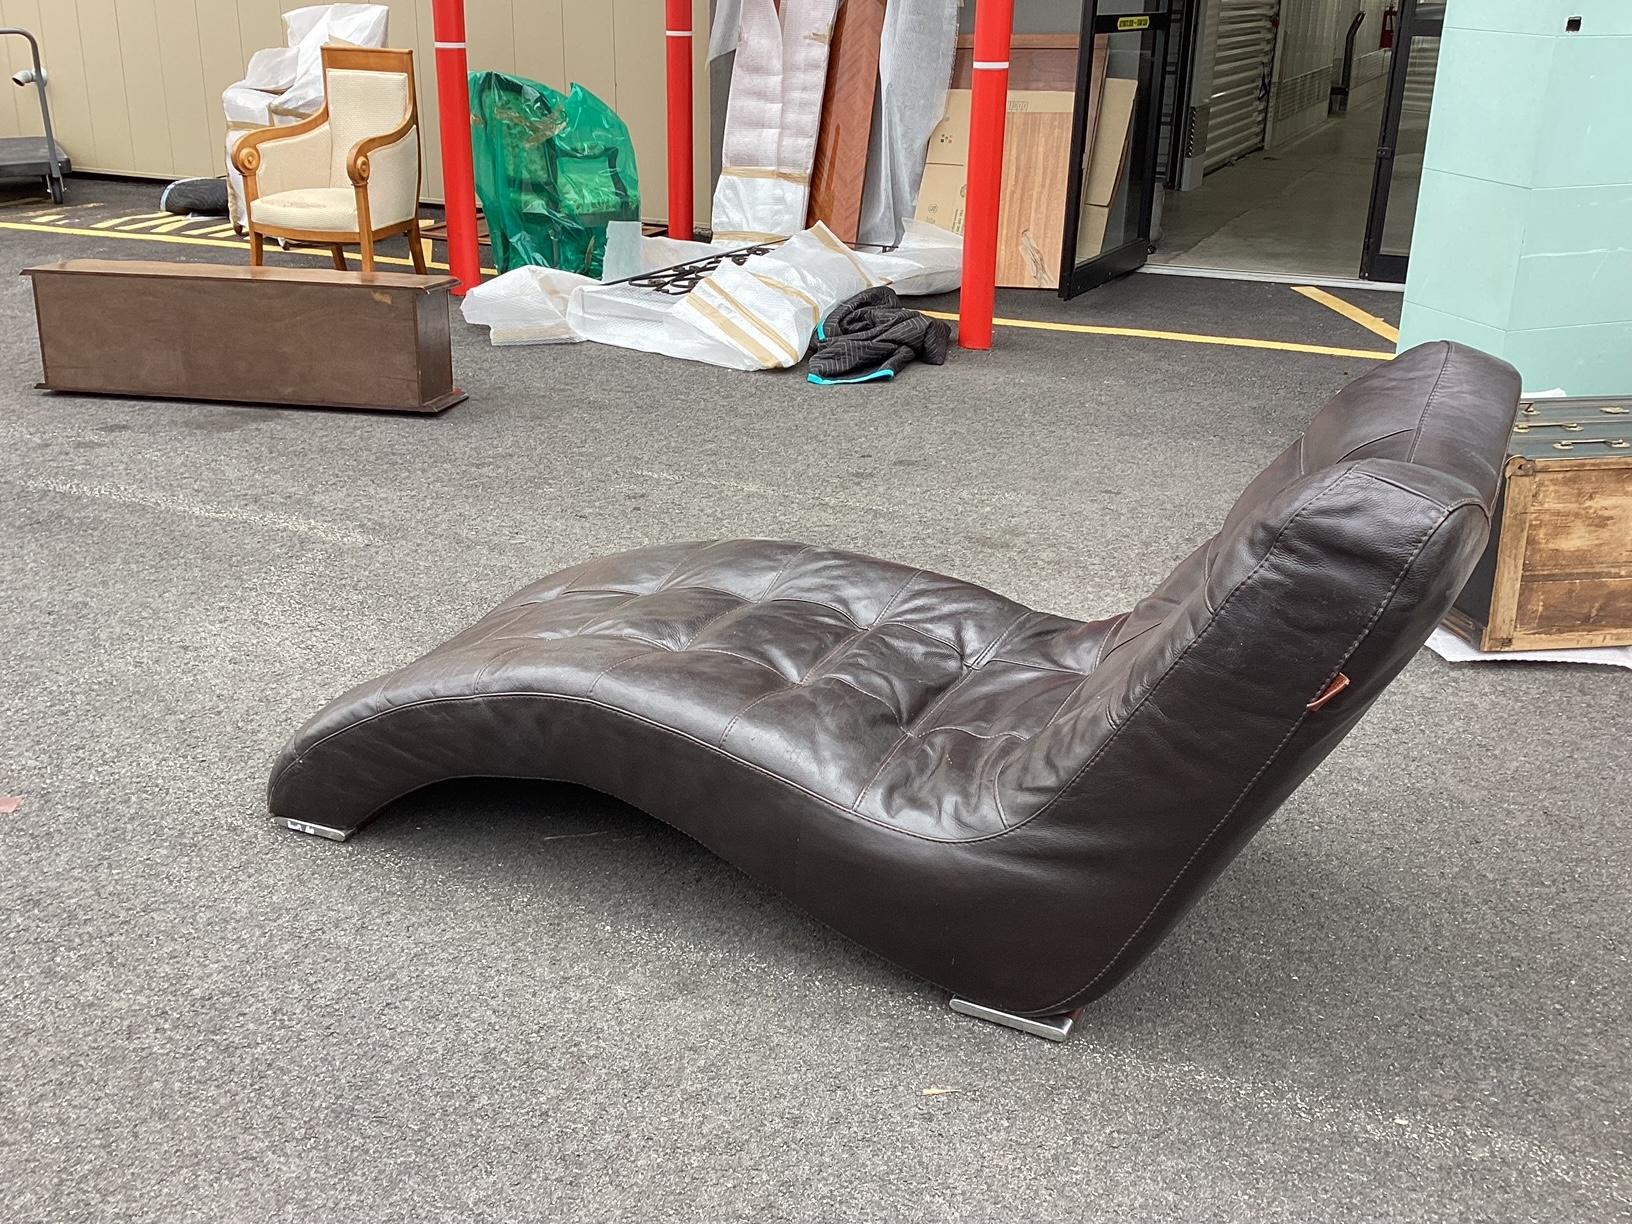 Sizzling Hot Vintage Italian Leather Chaise Longue In Good Condition For Sale In Hopewell, NJ